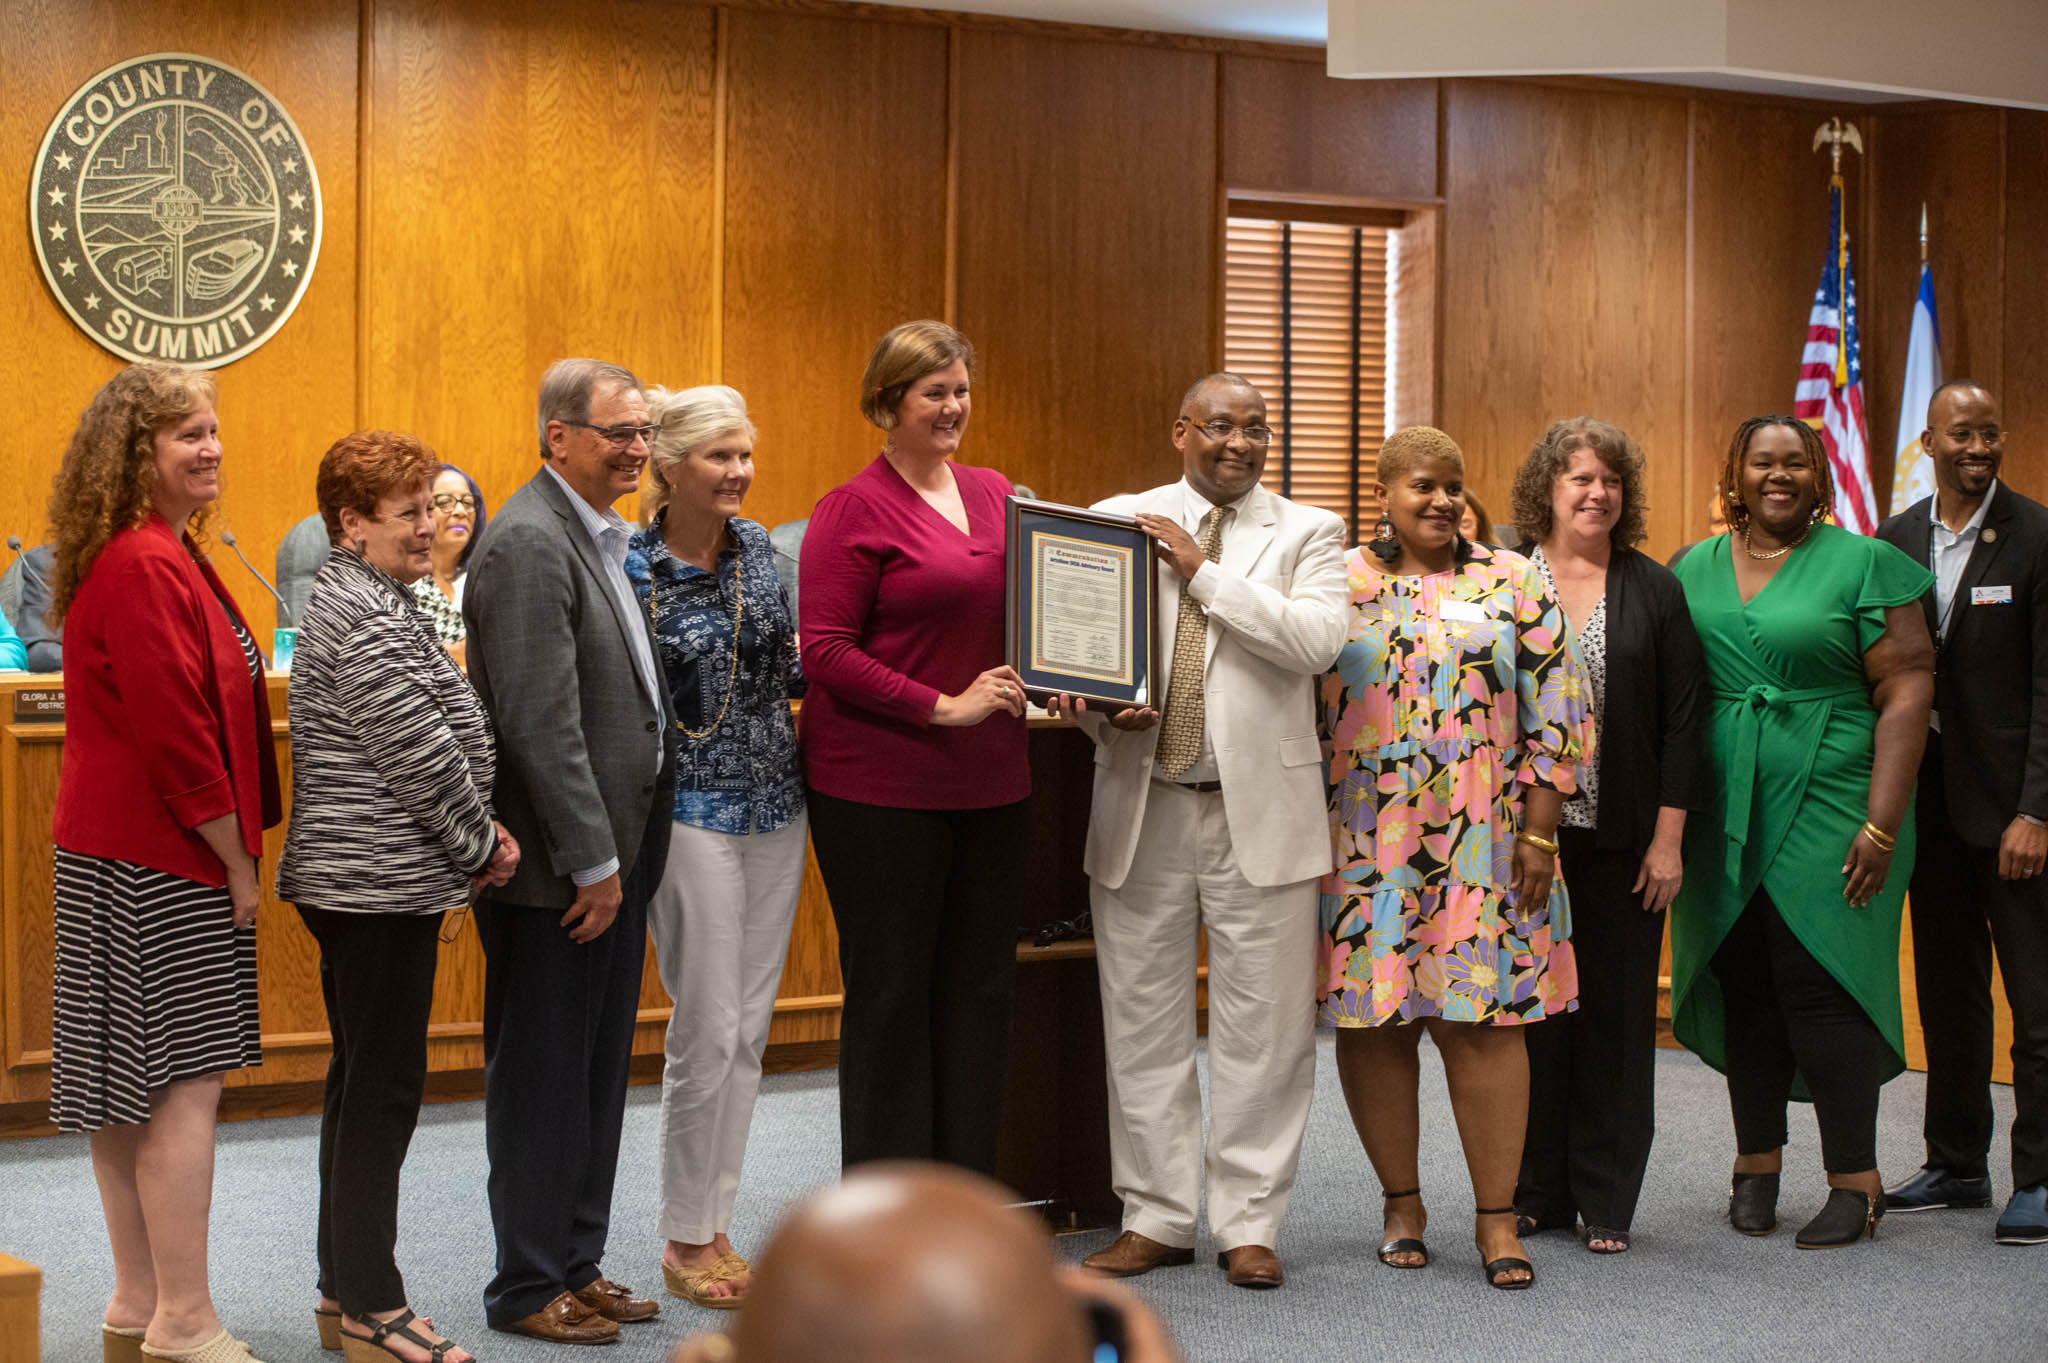 Thumbnail image for: DEIA Advisory Board for Arts and Culture Celebrates Commendation from Summit County Executive and Council